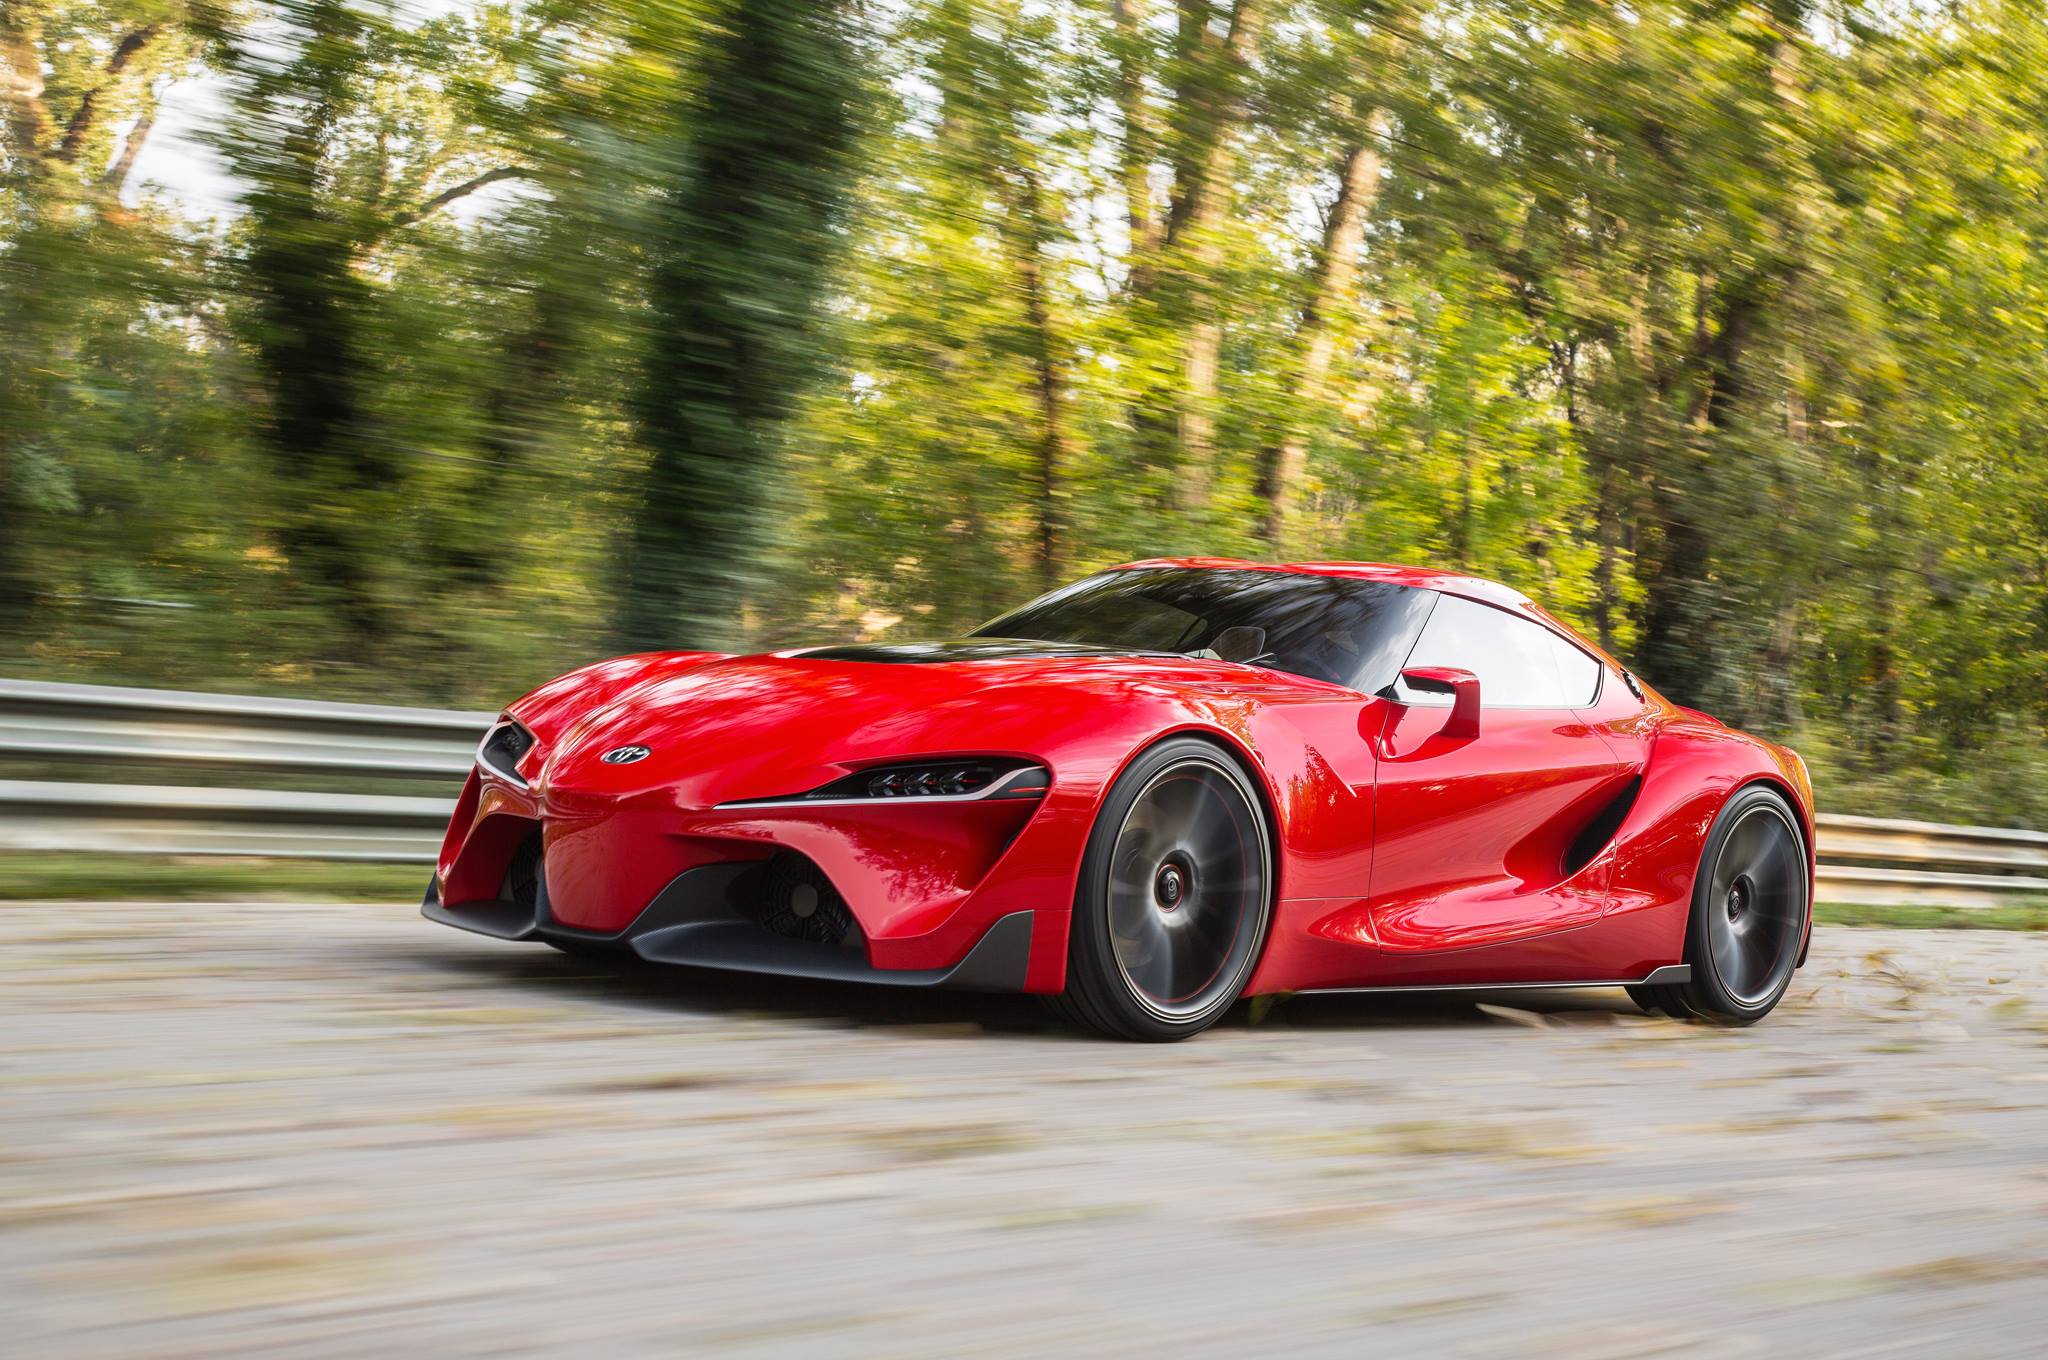 HQ Toyota FT-1 Concept Wallpapers | File 393.74Kb